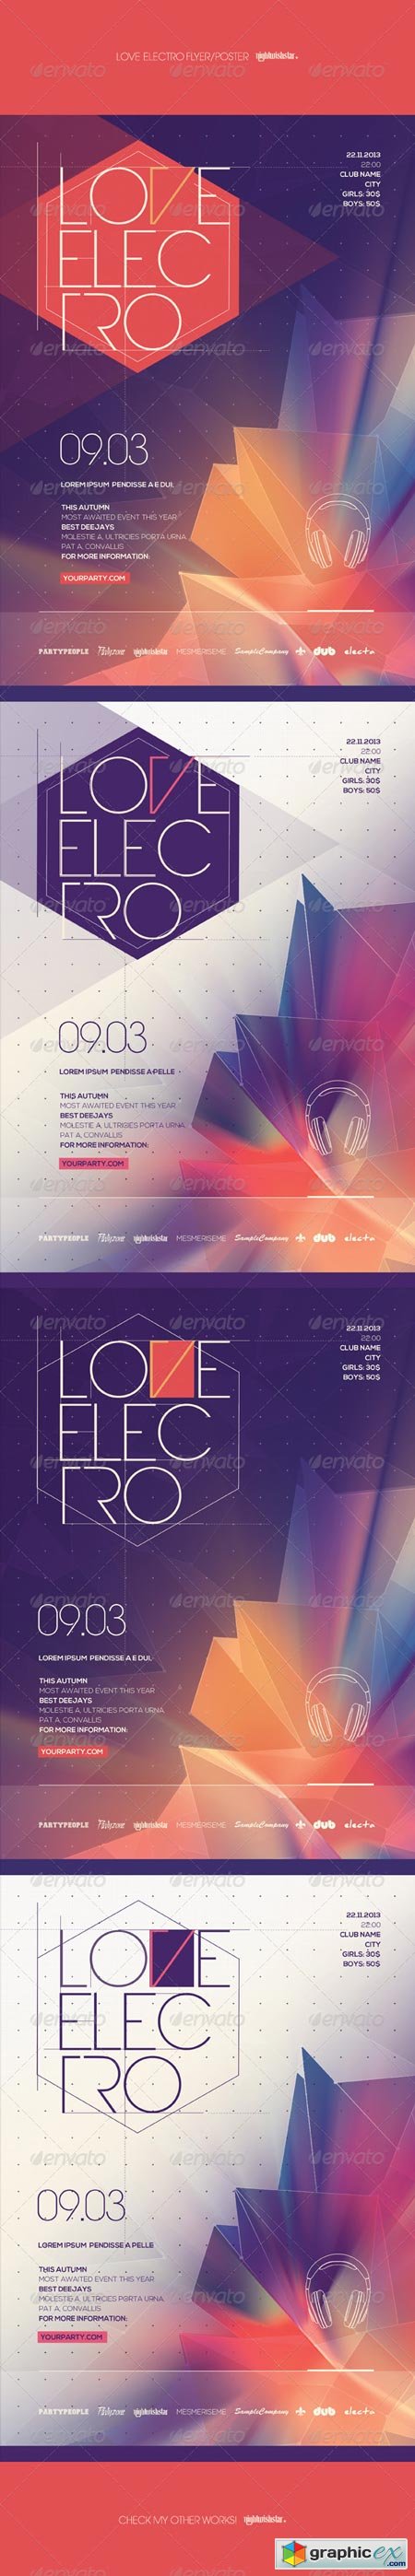 Love Electro Poster Flyer 7024227